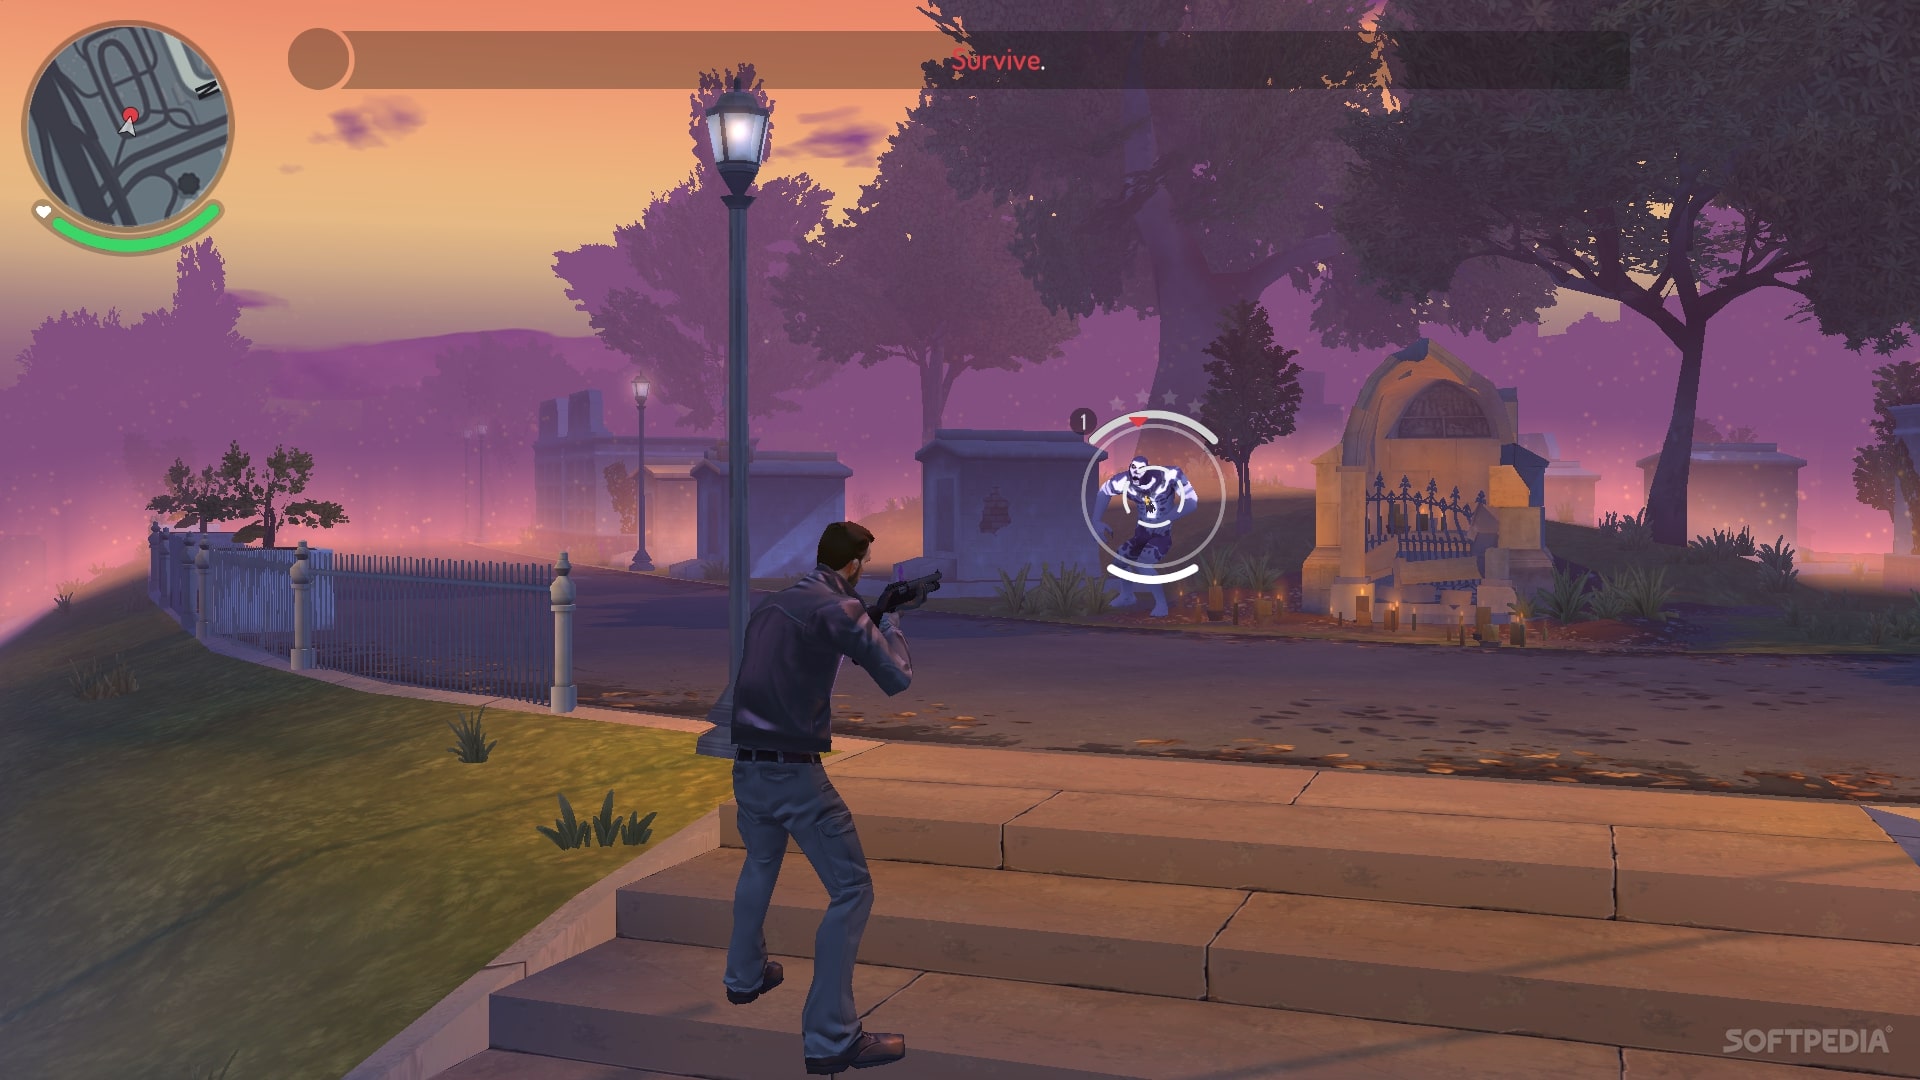 Gameloft's new open world game Gangstar New Orleans coming to